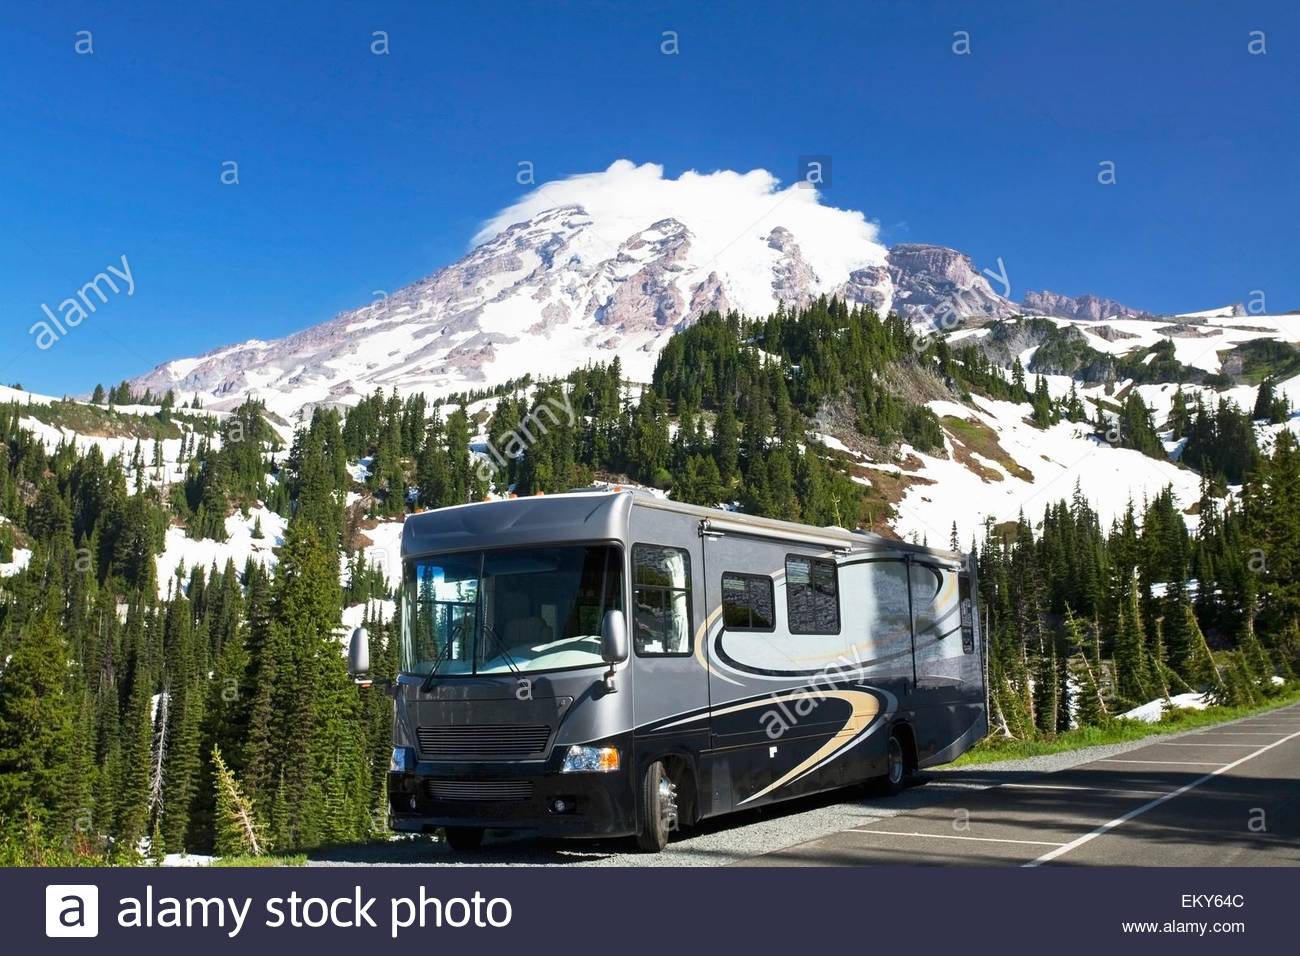 Rv Parked On The Side Of Road With Mountain In Background